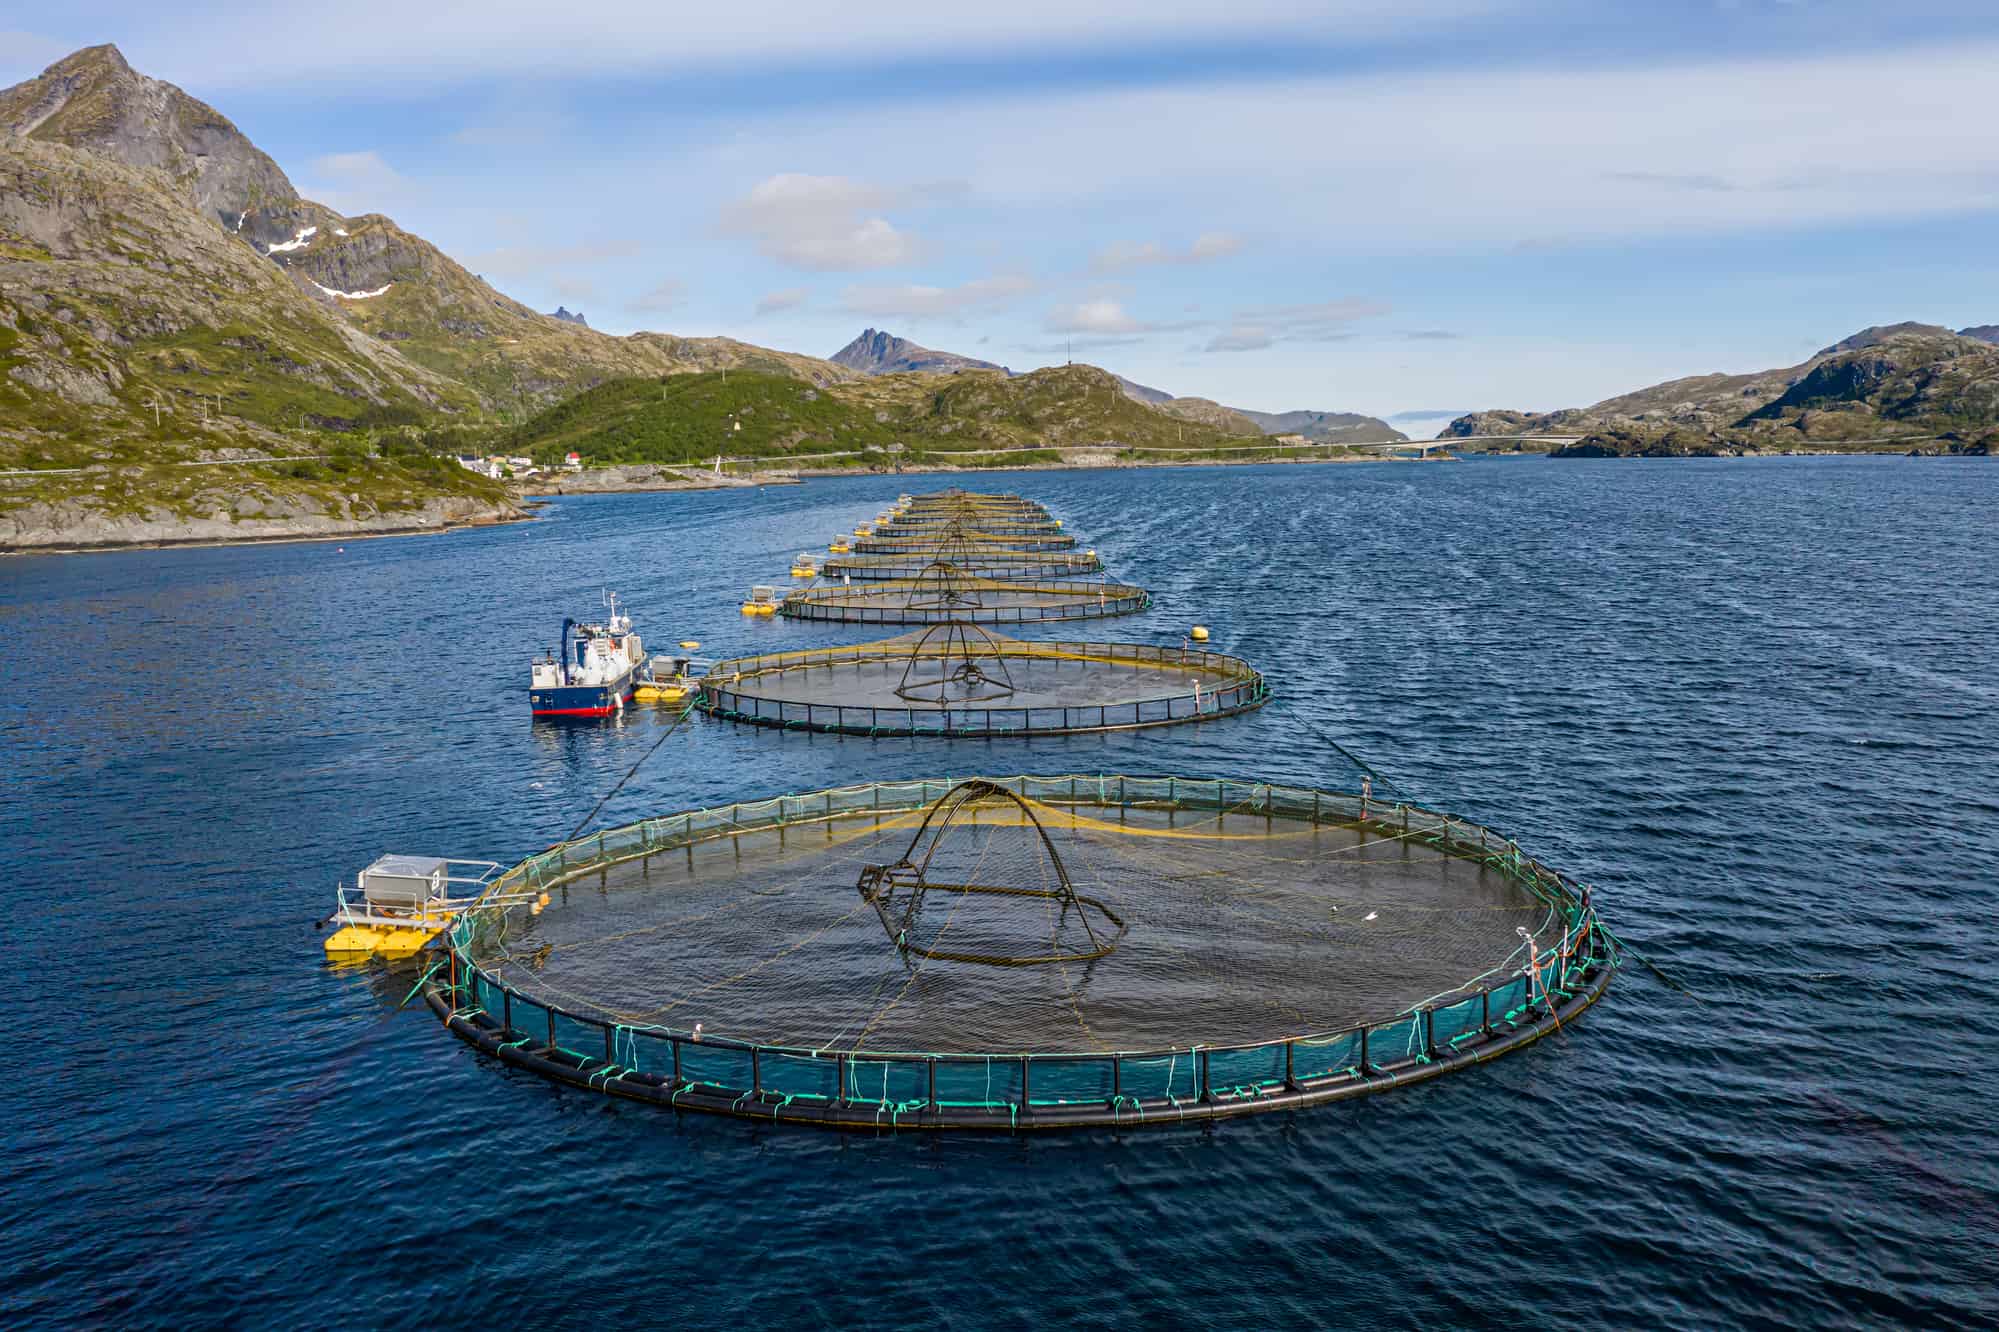 Farmed fishing nets and tanks in the ocean near norway.